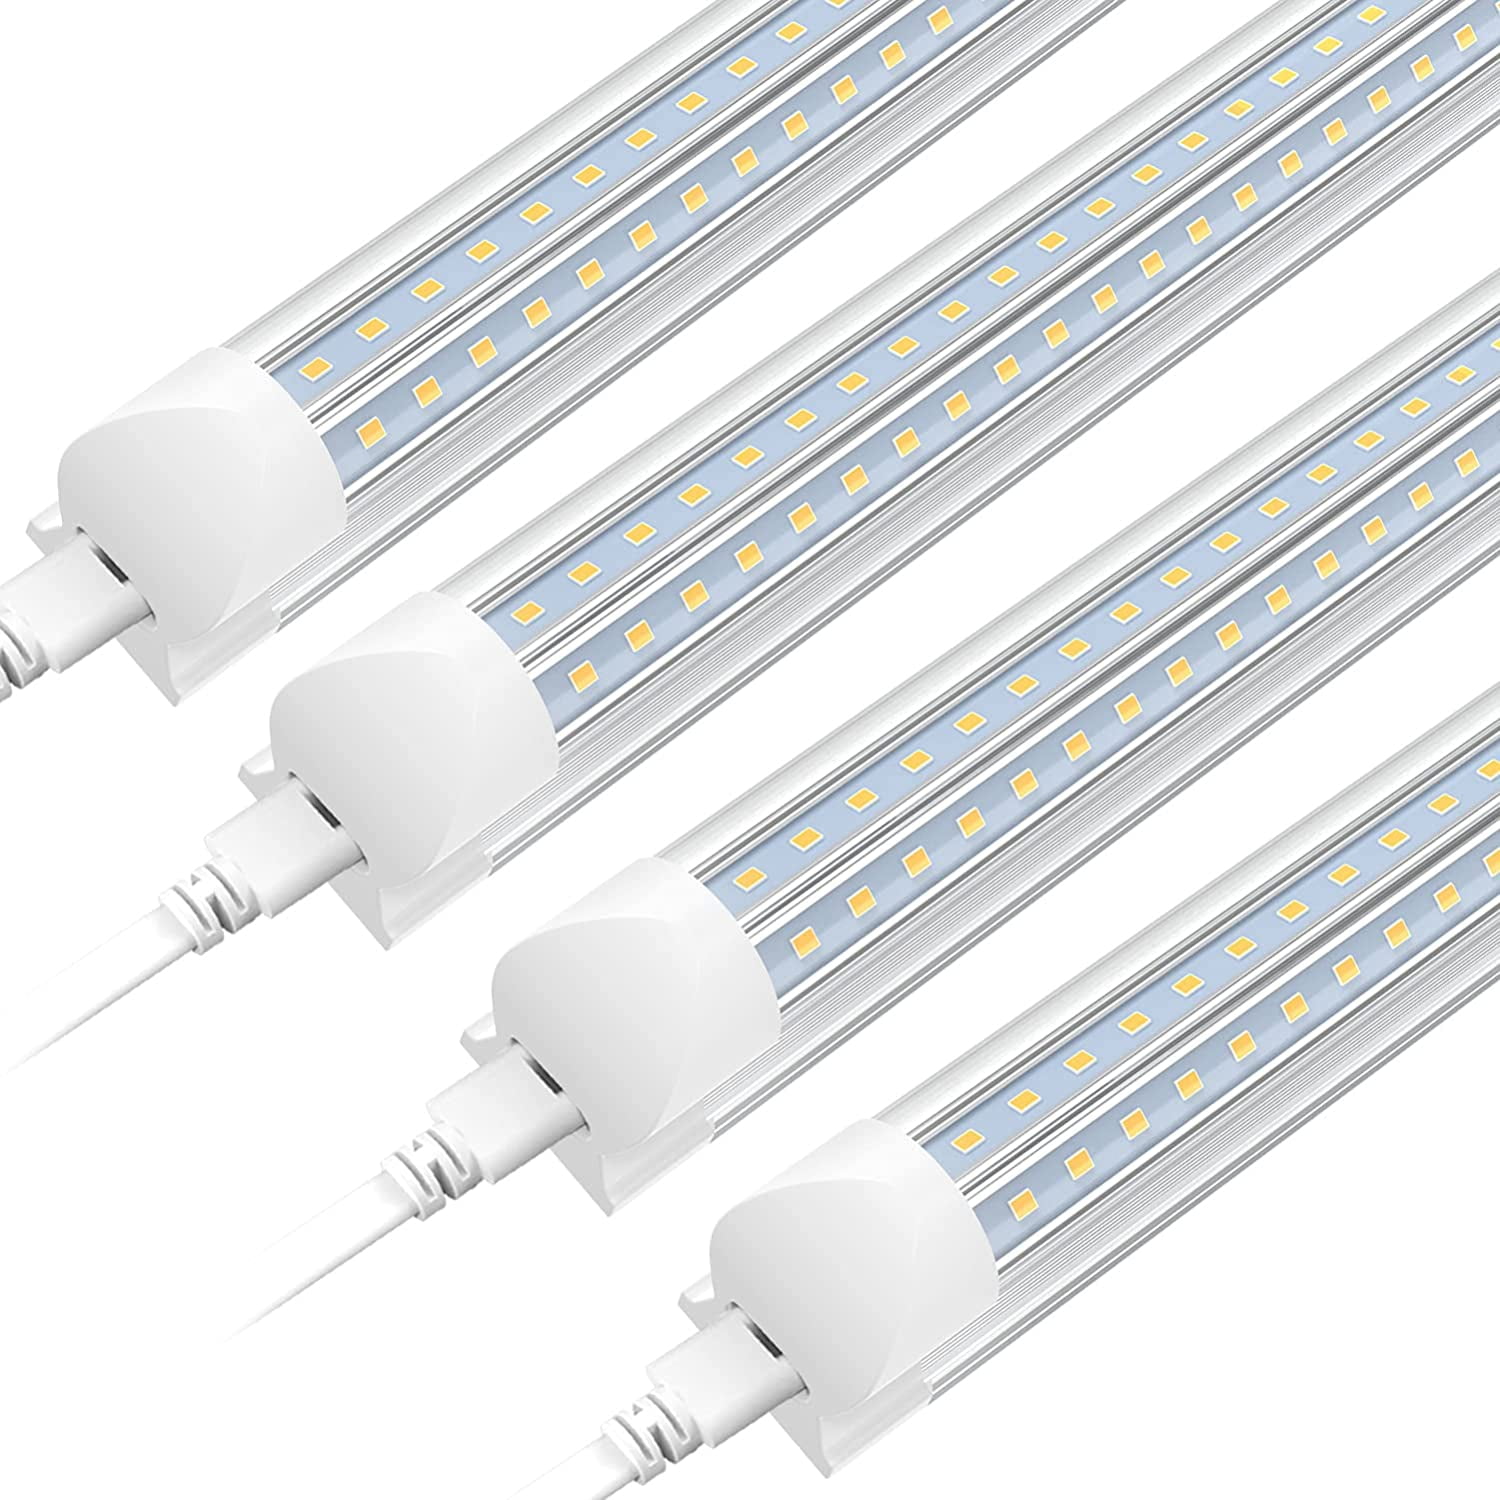 Details about   25 Pack 4FT 60W Integrated LED Tube Light Bulbs 6500K  Shop Light Fixture 6000LM 